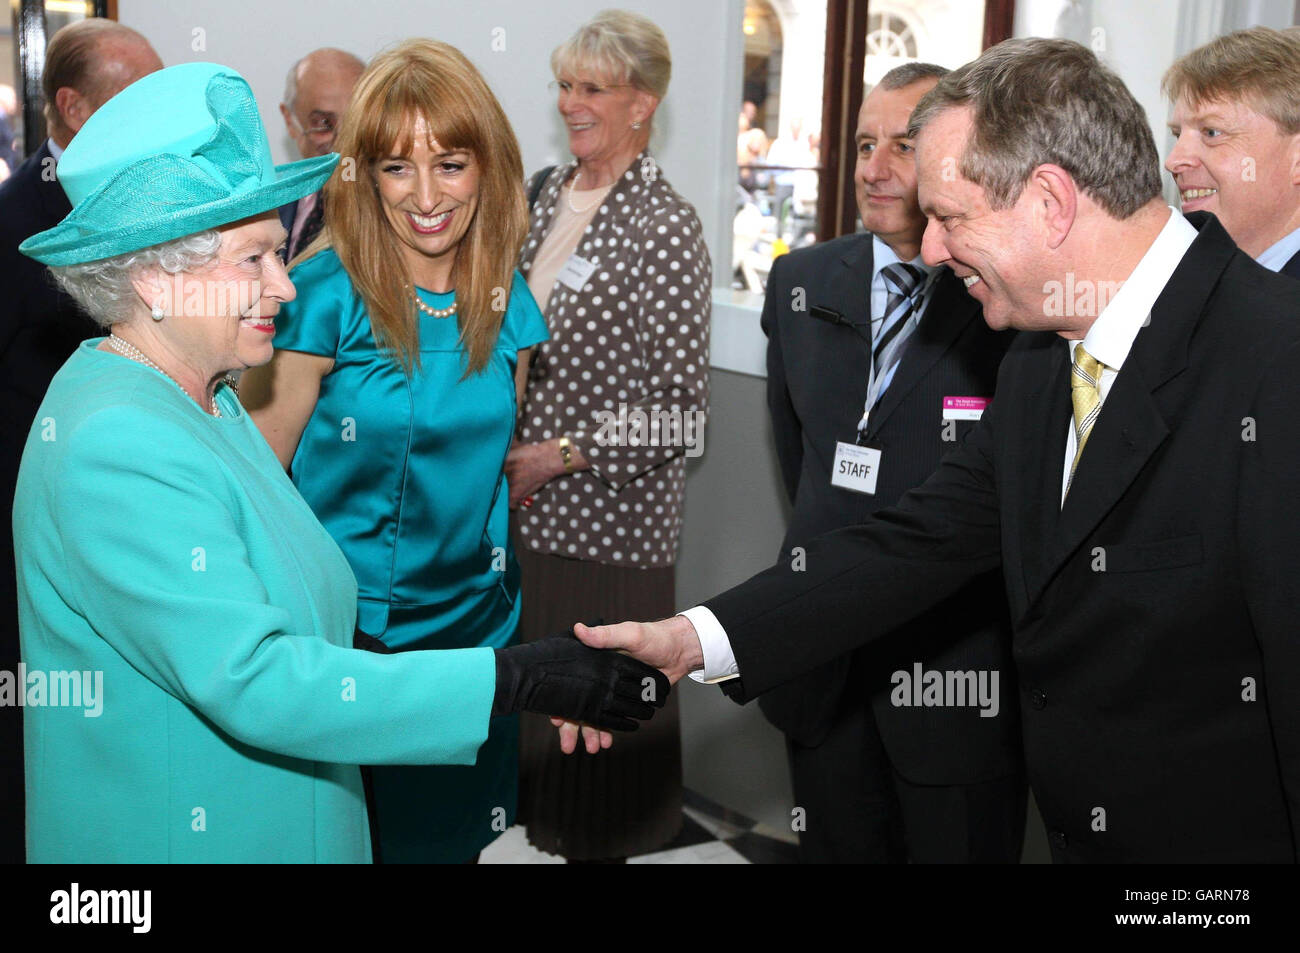 Britain's Queen Elizabeth II meets Mike Rann, Premier of South Australia, during a visit to the Royal Institution of Great Britain, London. Stock Photo